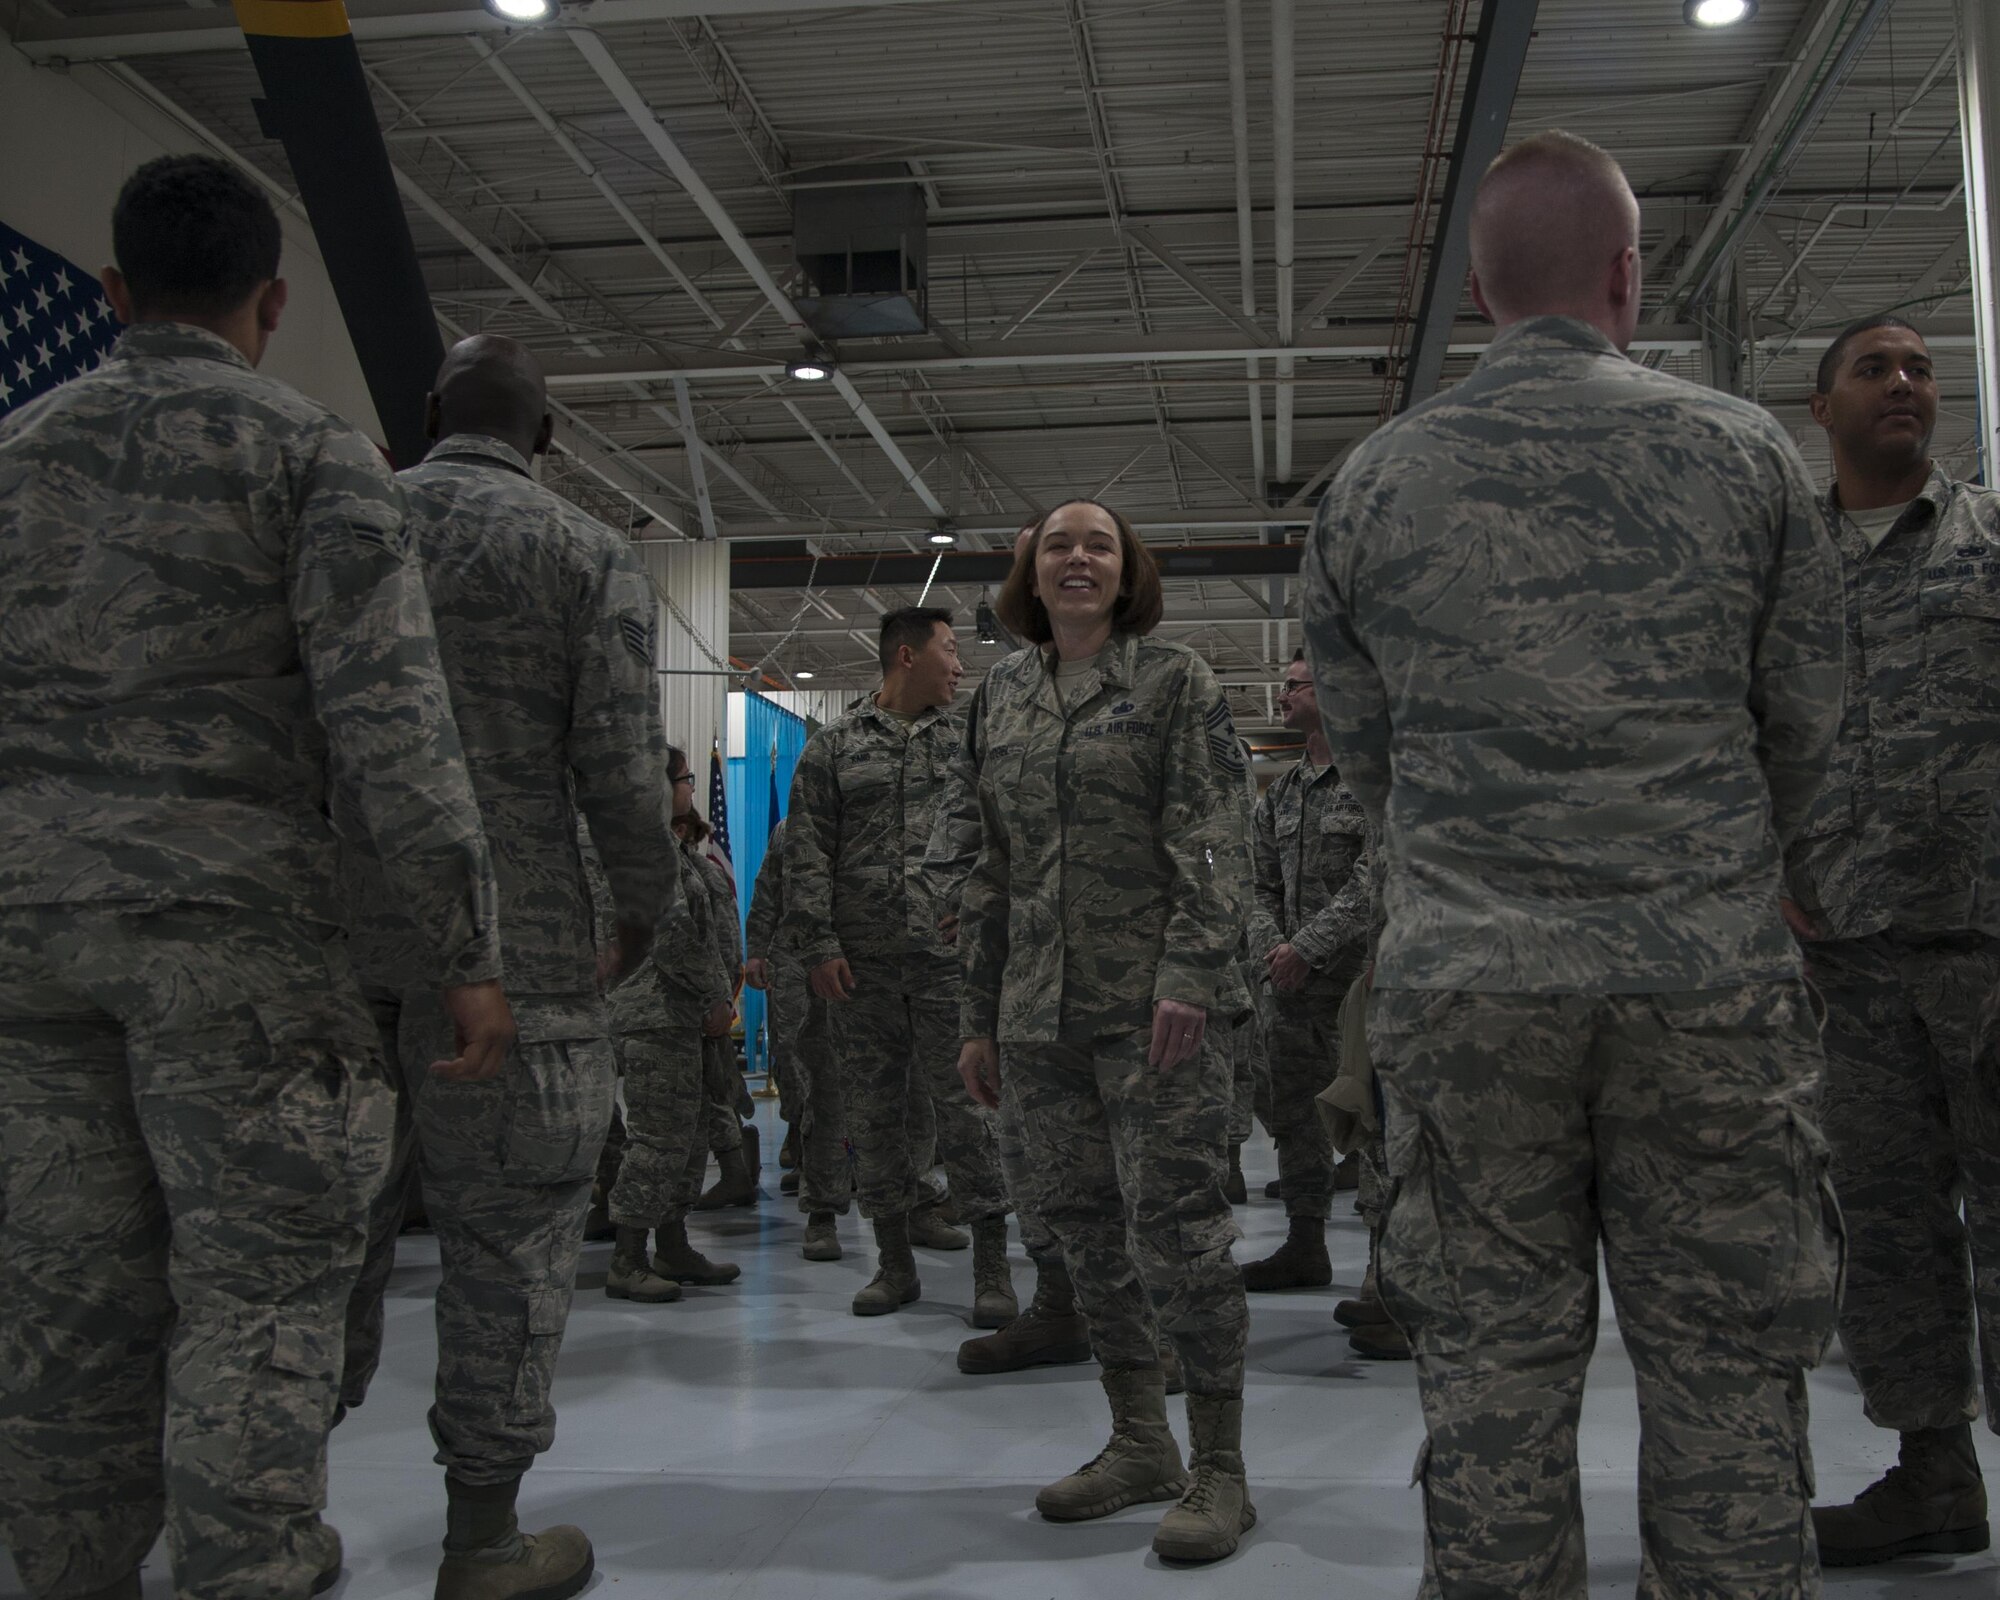 U.S. Air Force Chief Master Sgt. Juliet Gudgel, command chief master sergeant of Air Education and Training Command, laughs while speaking with Airmen from the 58th Special Operations Wing, at Kirtland Air Force Base, N.M., Nov. 27, 2017. Gudgel visited the installation for two days to speak with the Airmen and gain a better understanding of what they do to support the 58th SOW, AETC and Air Force Special Operations Command. (U.S. Air Force photo by Staff Sgt. J.D. Strong II)